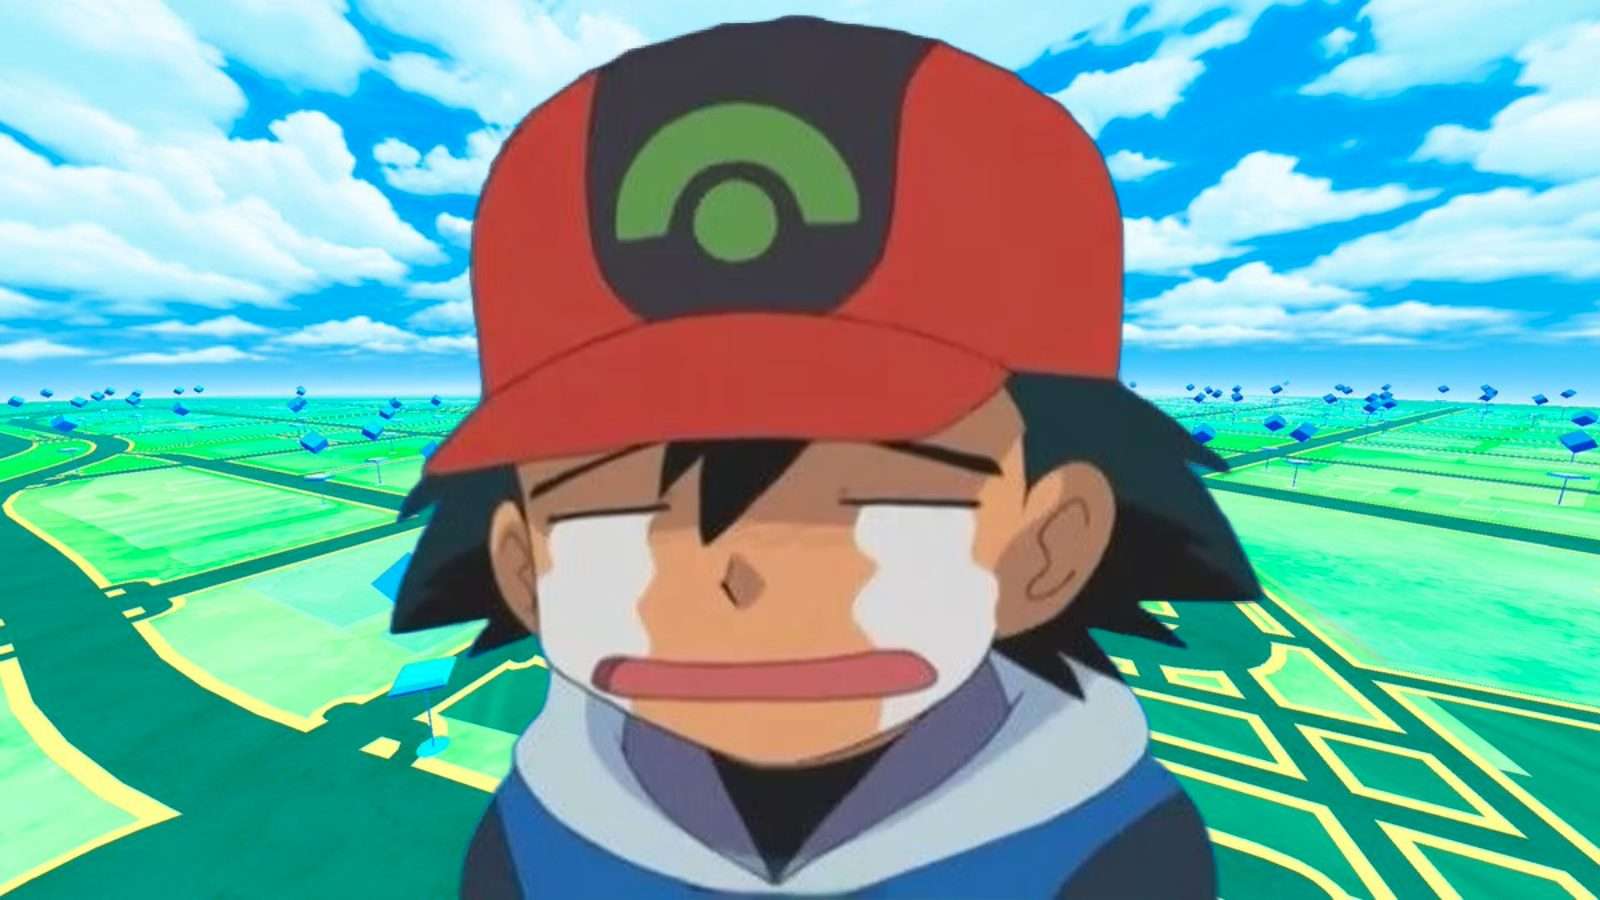 Ash Ketchum crying with a Pokemon Go background.